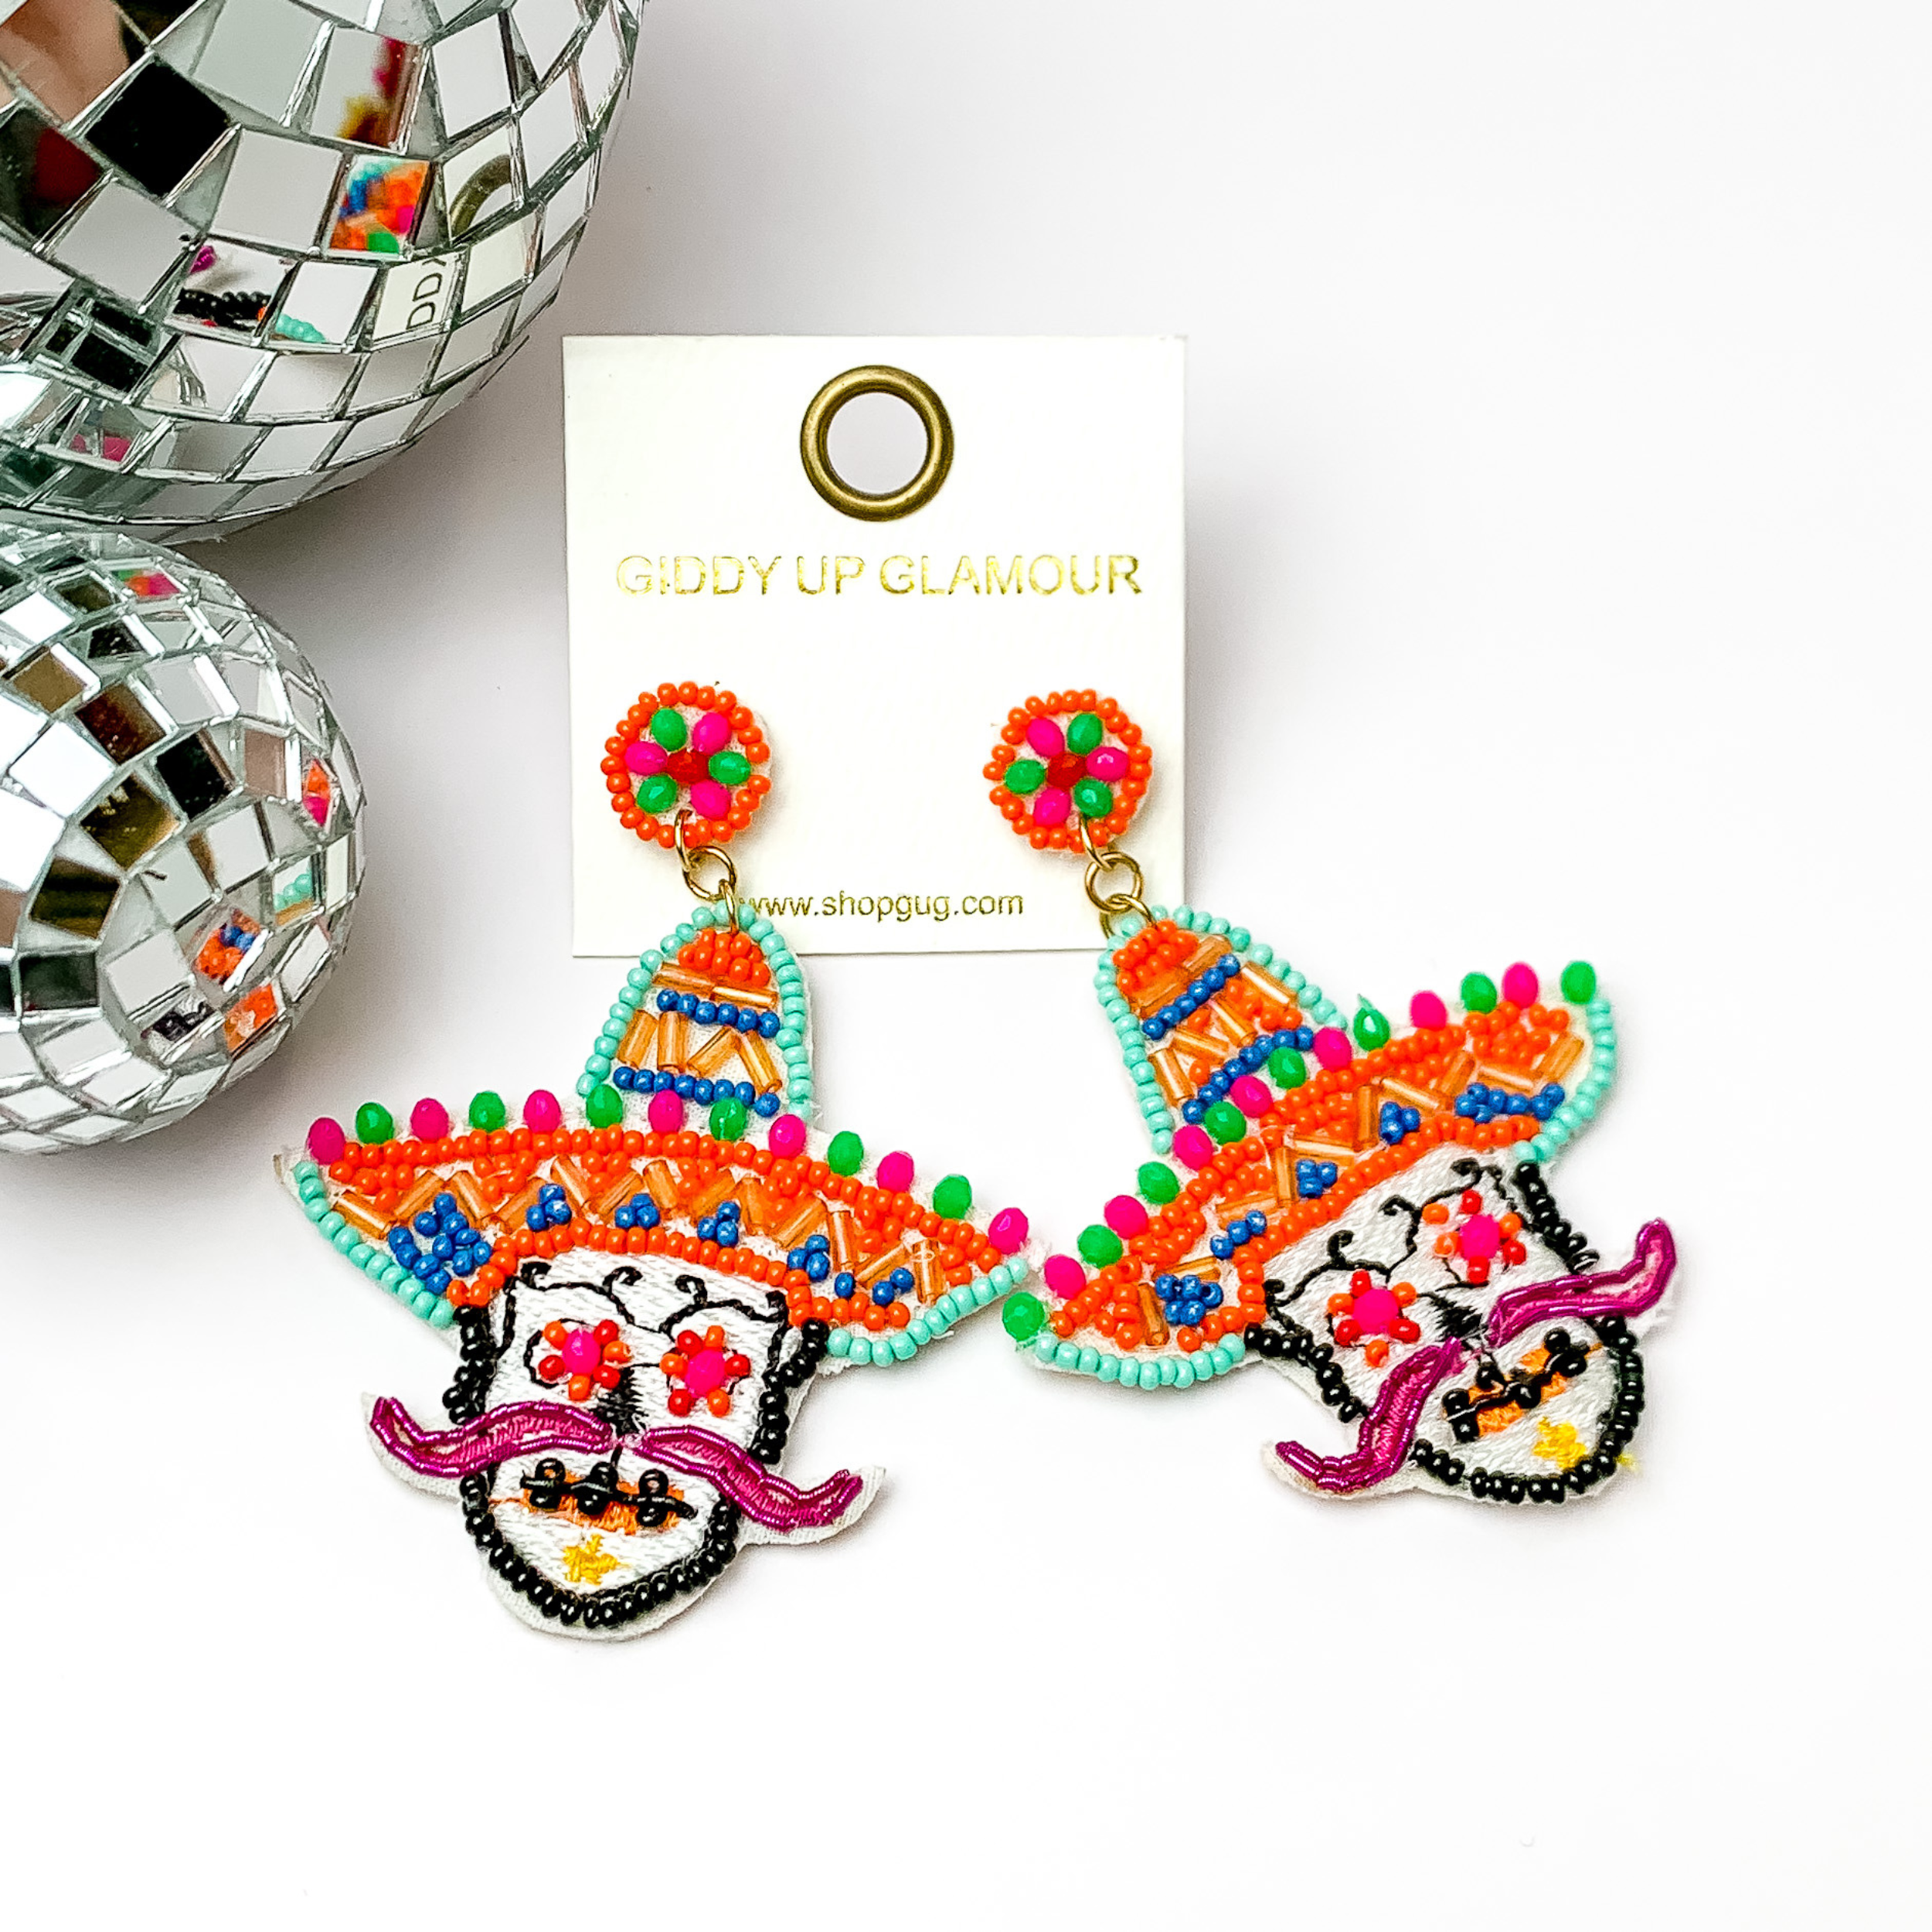 These are sugar skull post earrings in orange and other colors.. The rest has multicolored stitching all around. These earrings are taken on a white background with disco balls in the left.